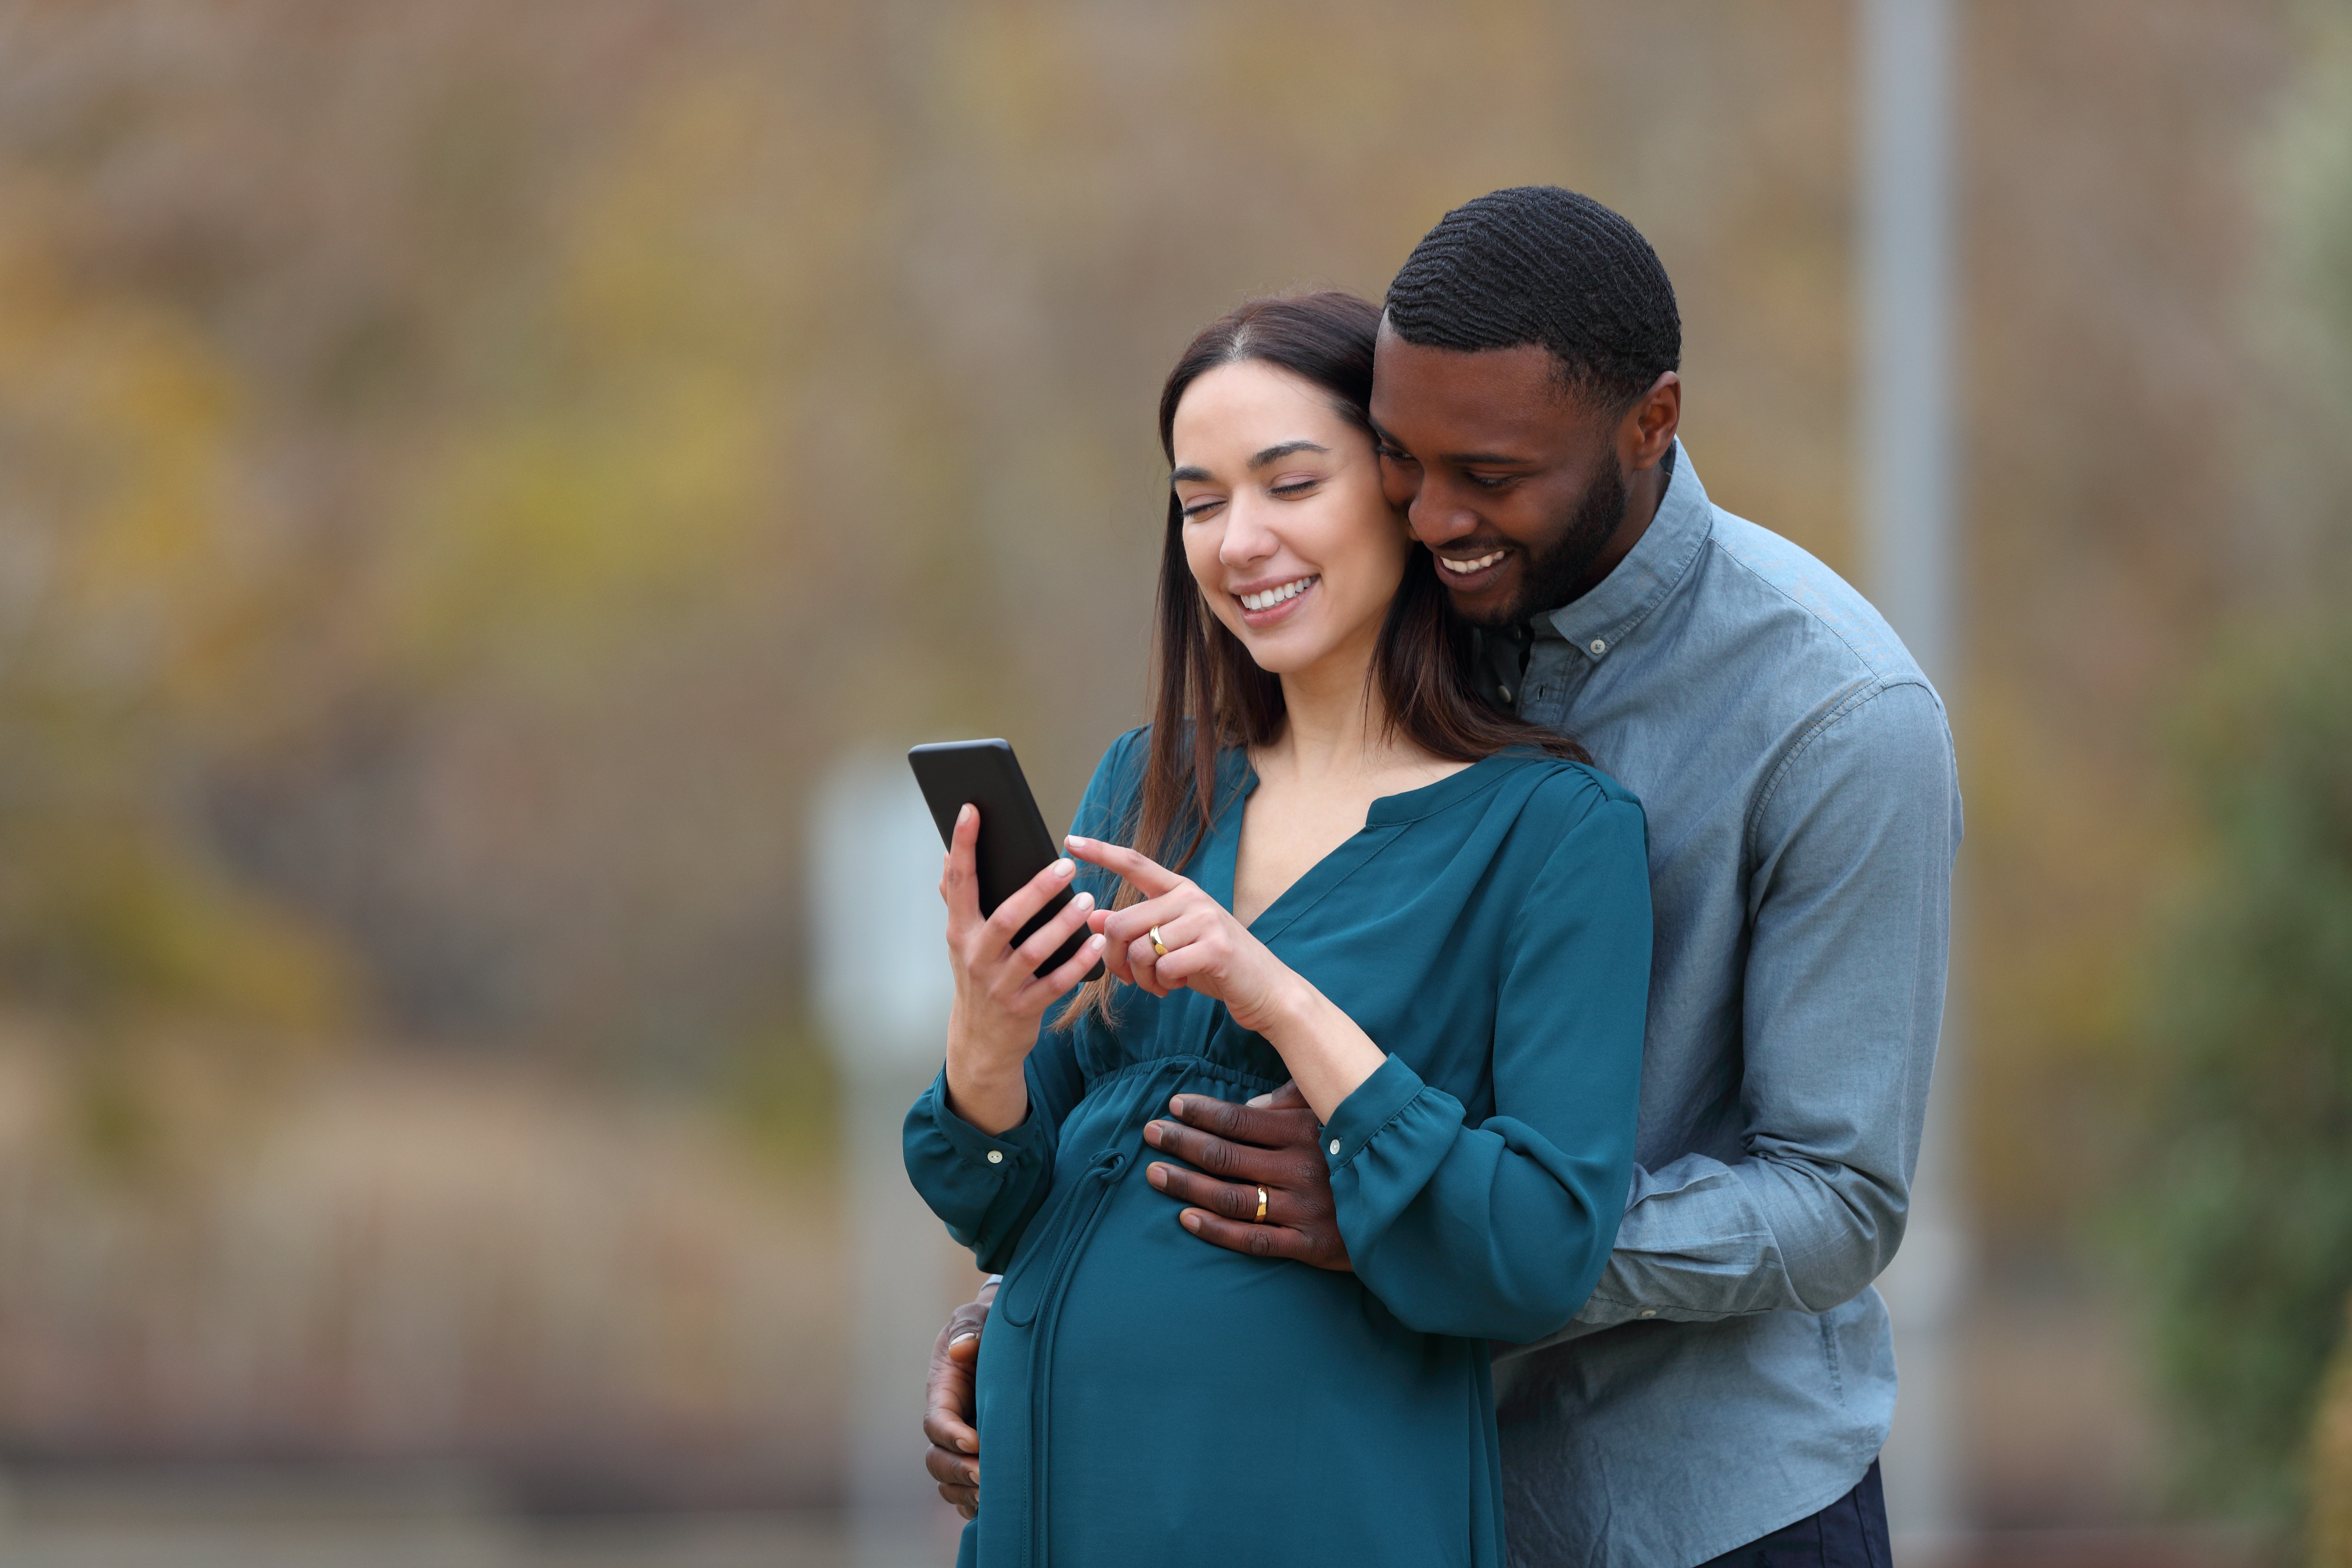 An interracial couple with a pregnant wife and her husband checking smartphone in a park | Source: Shutterstock